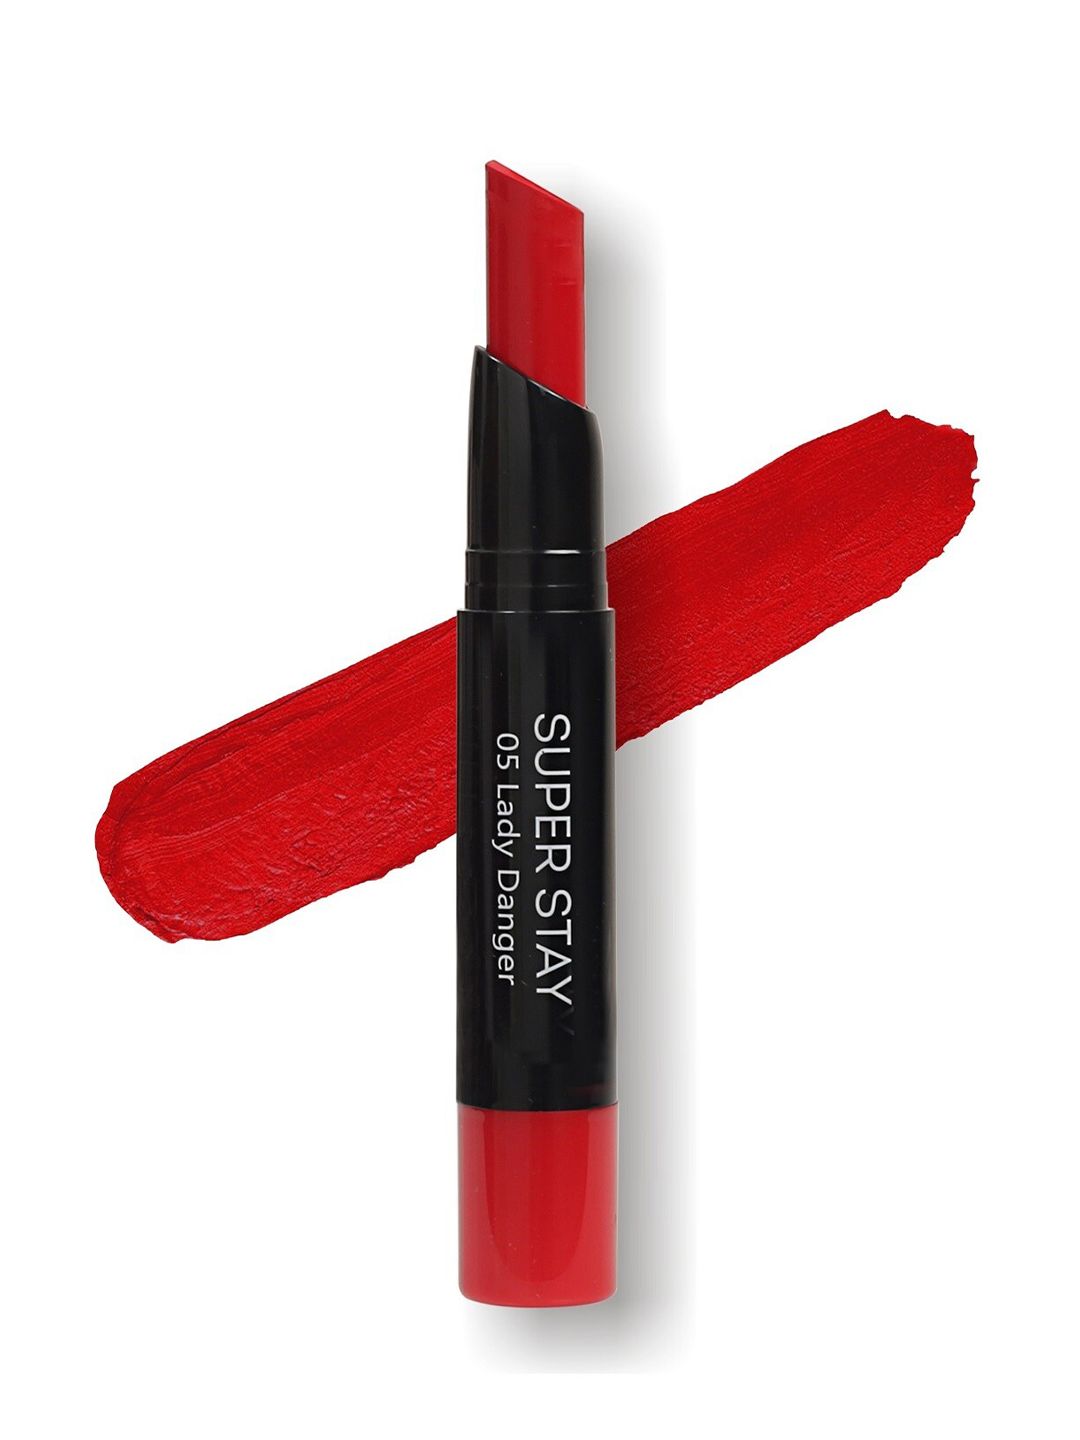 ME-ON Super Stay Lipstick Shade 05 - Lady Danger Price in India